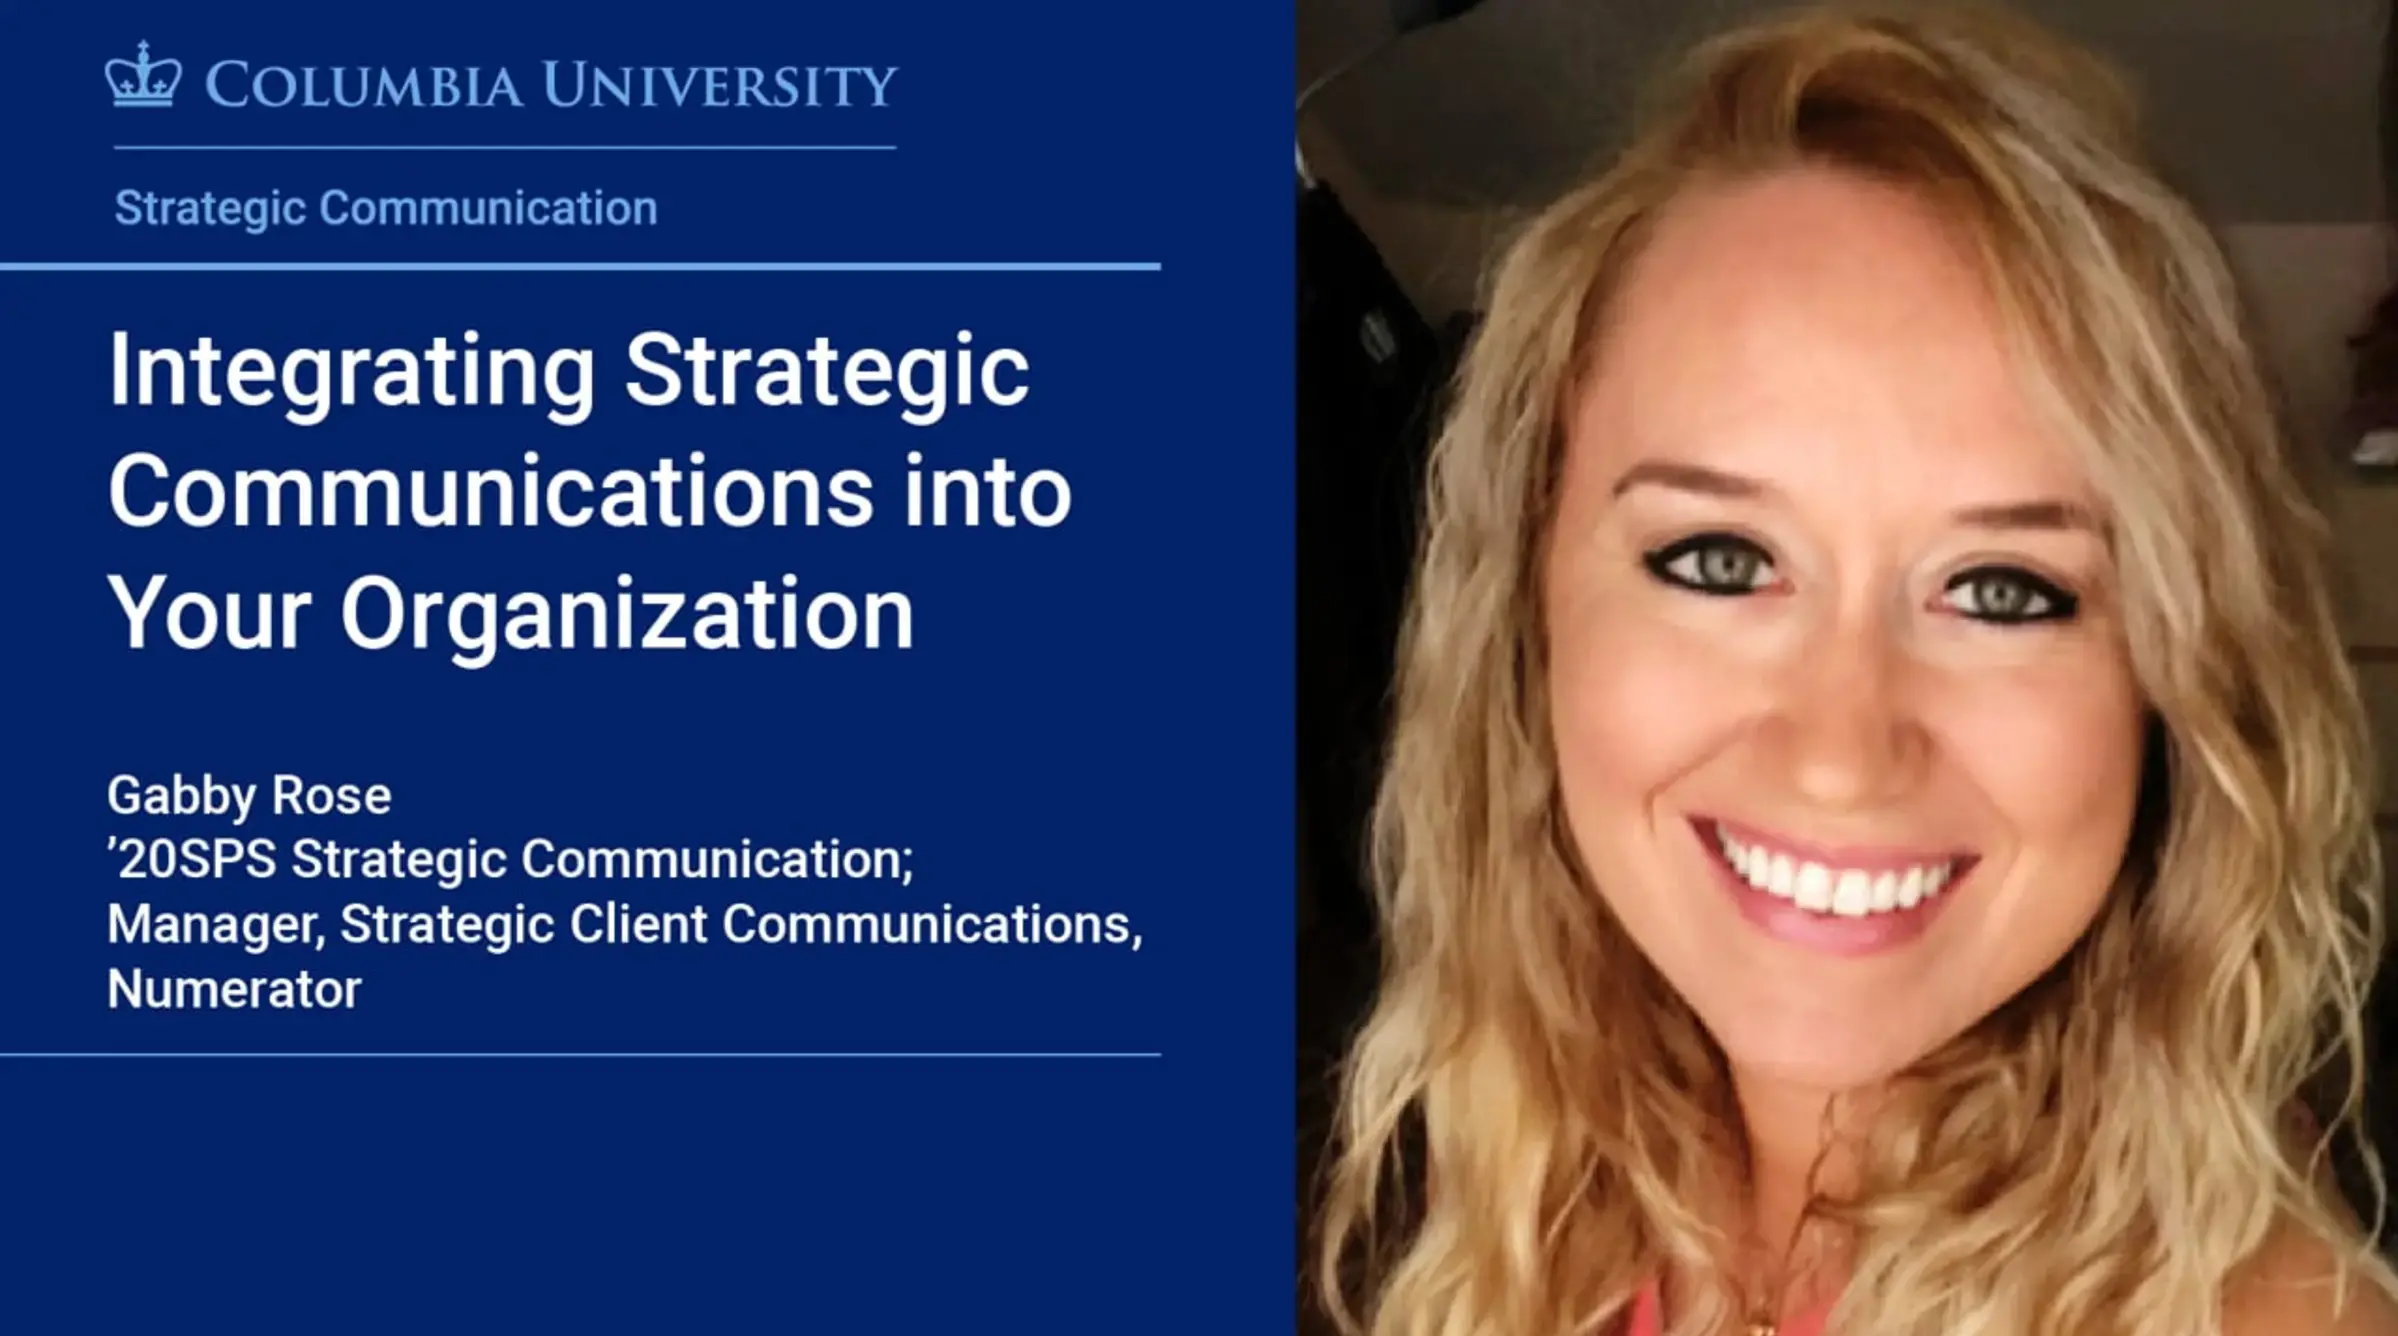 Integrating Strategic Communications into Your Organization - Gabby Rose, '20SPS Strategic Communication